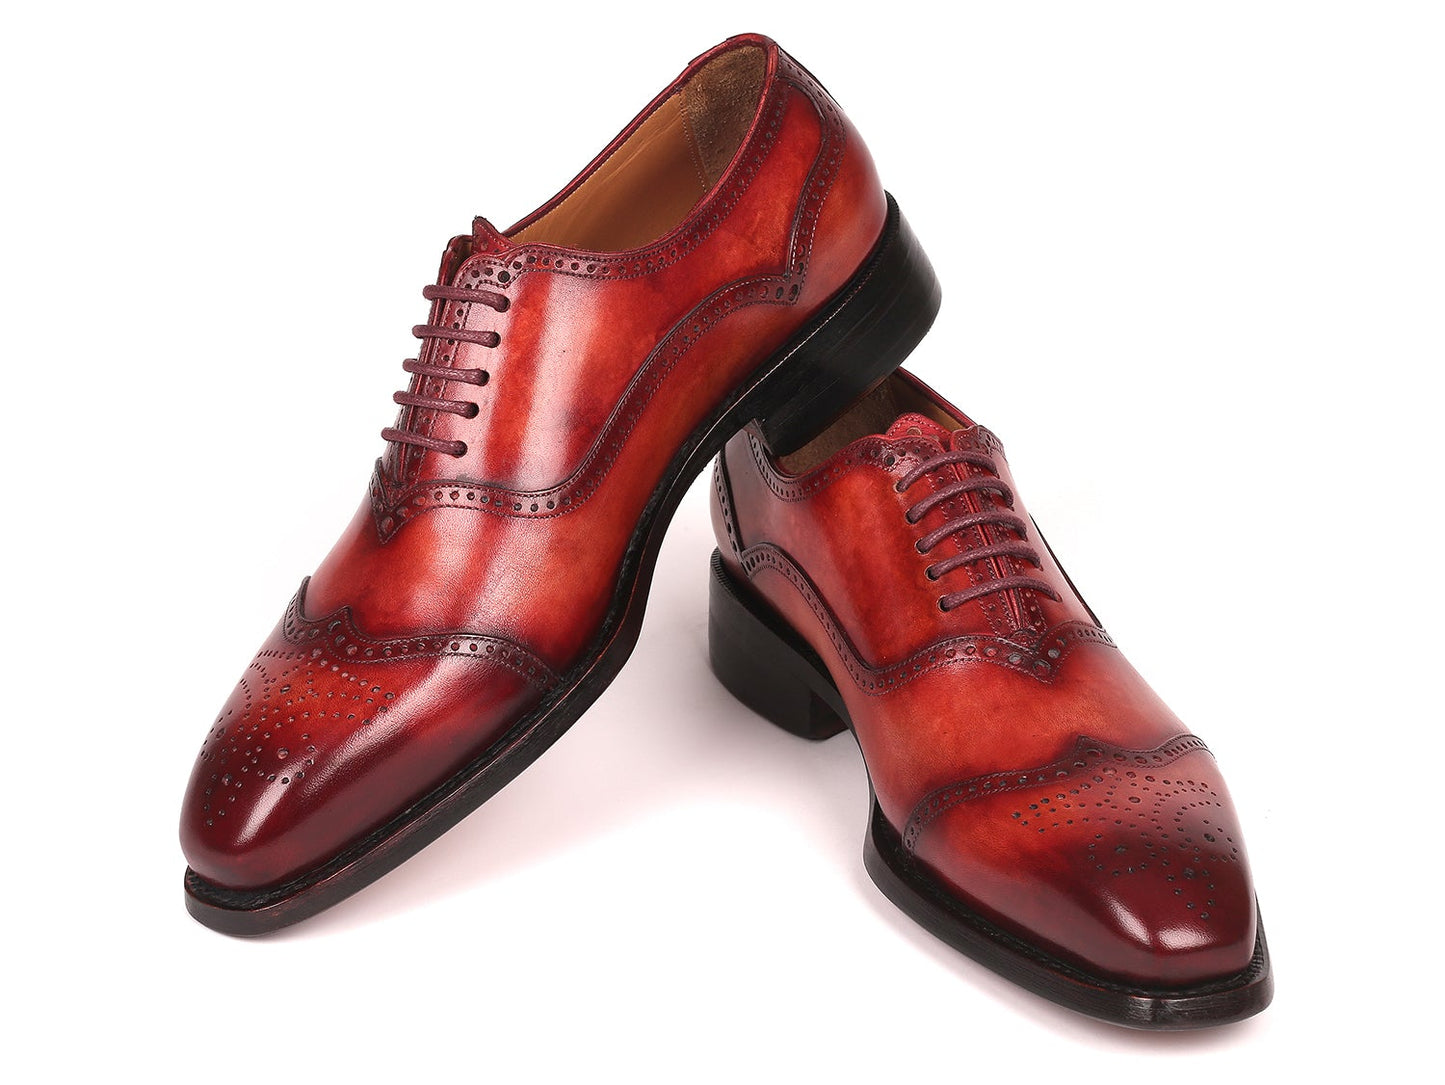 Paul Parkman Men's Goodyear Welted Oxford Shoes Reddish Brown (ID#094-RDH)